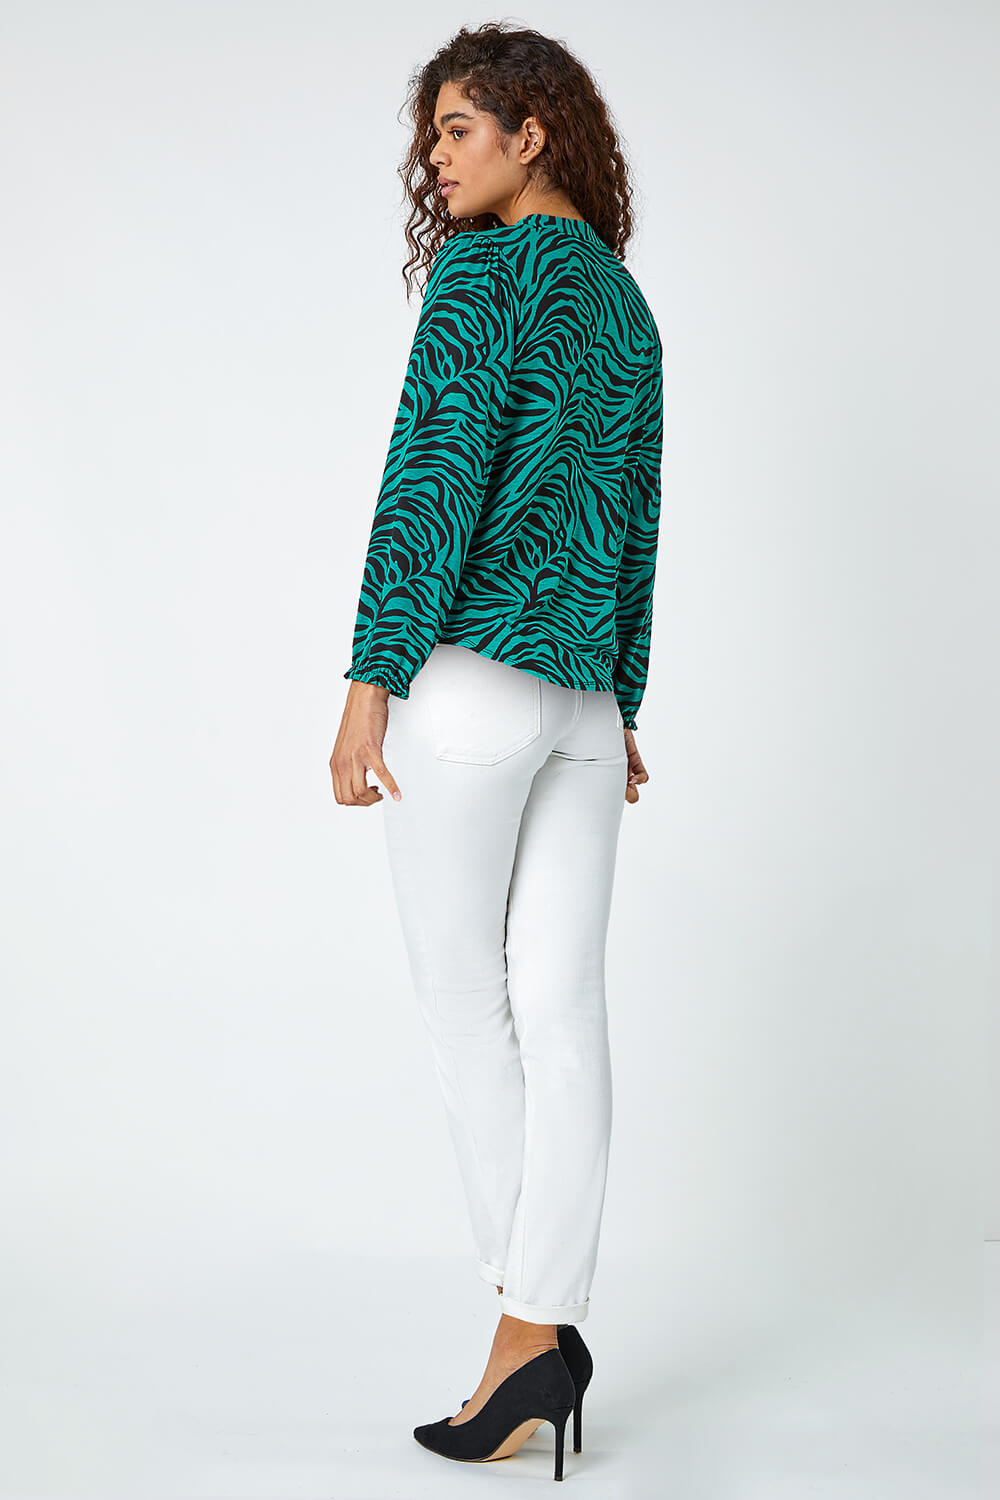 Green Animal Print Tie Neck Stretch Top, Image 3 of 5